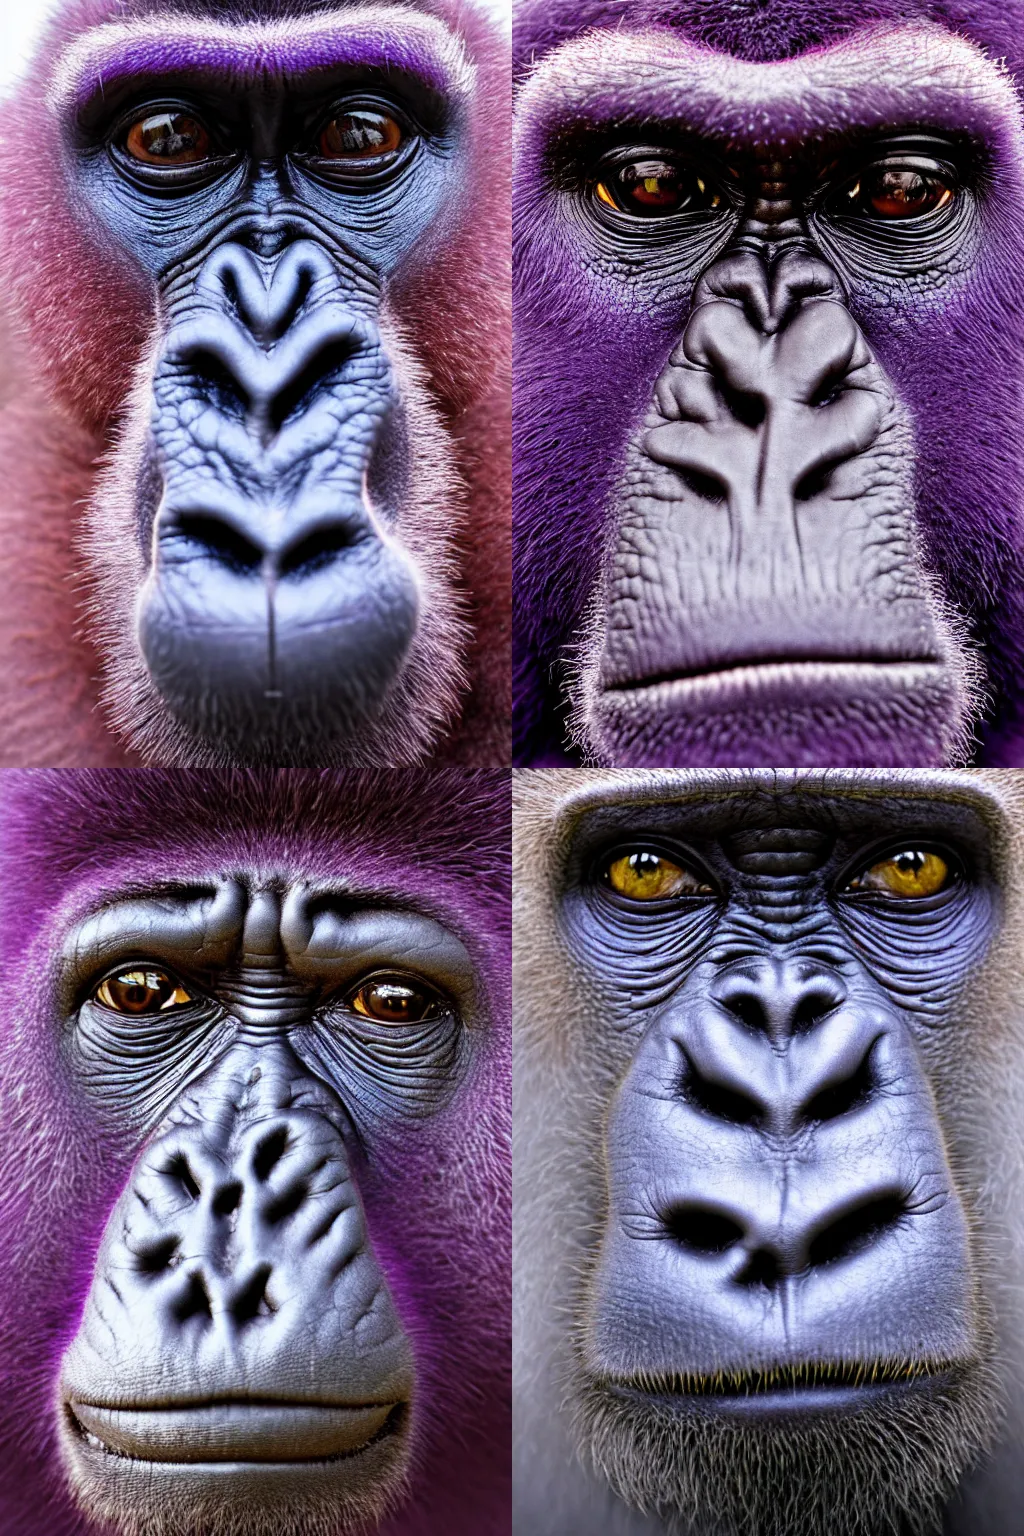 Prompt: purple gorilla, award winning photograph for national geographic, face closeup